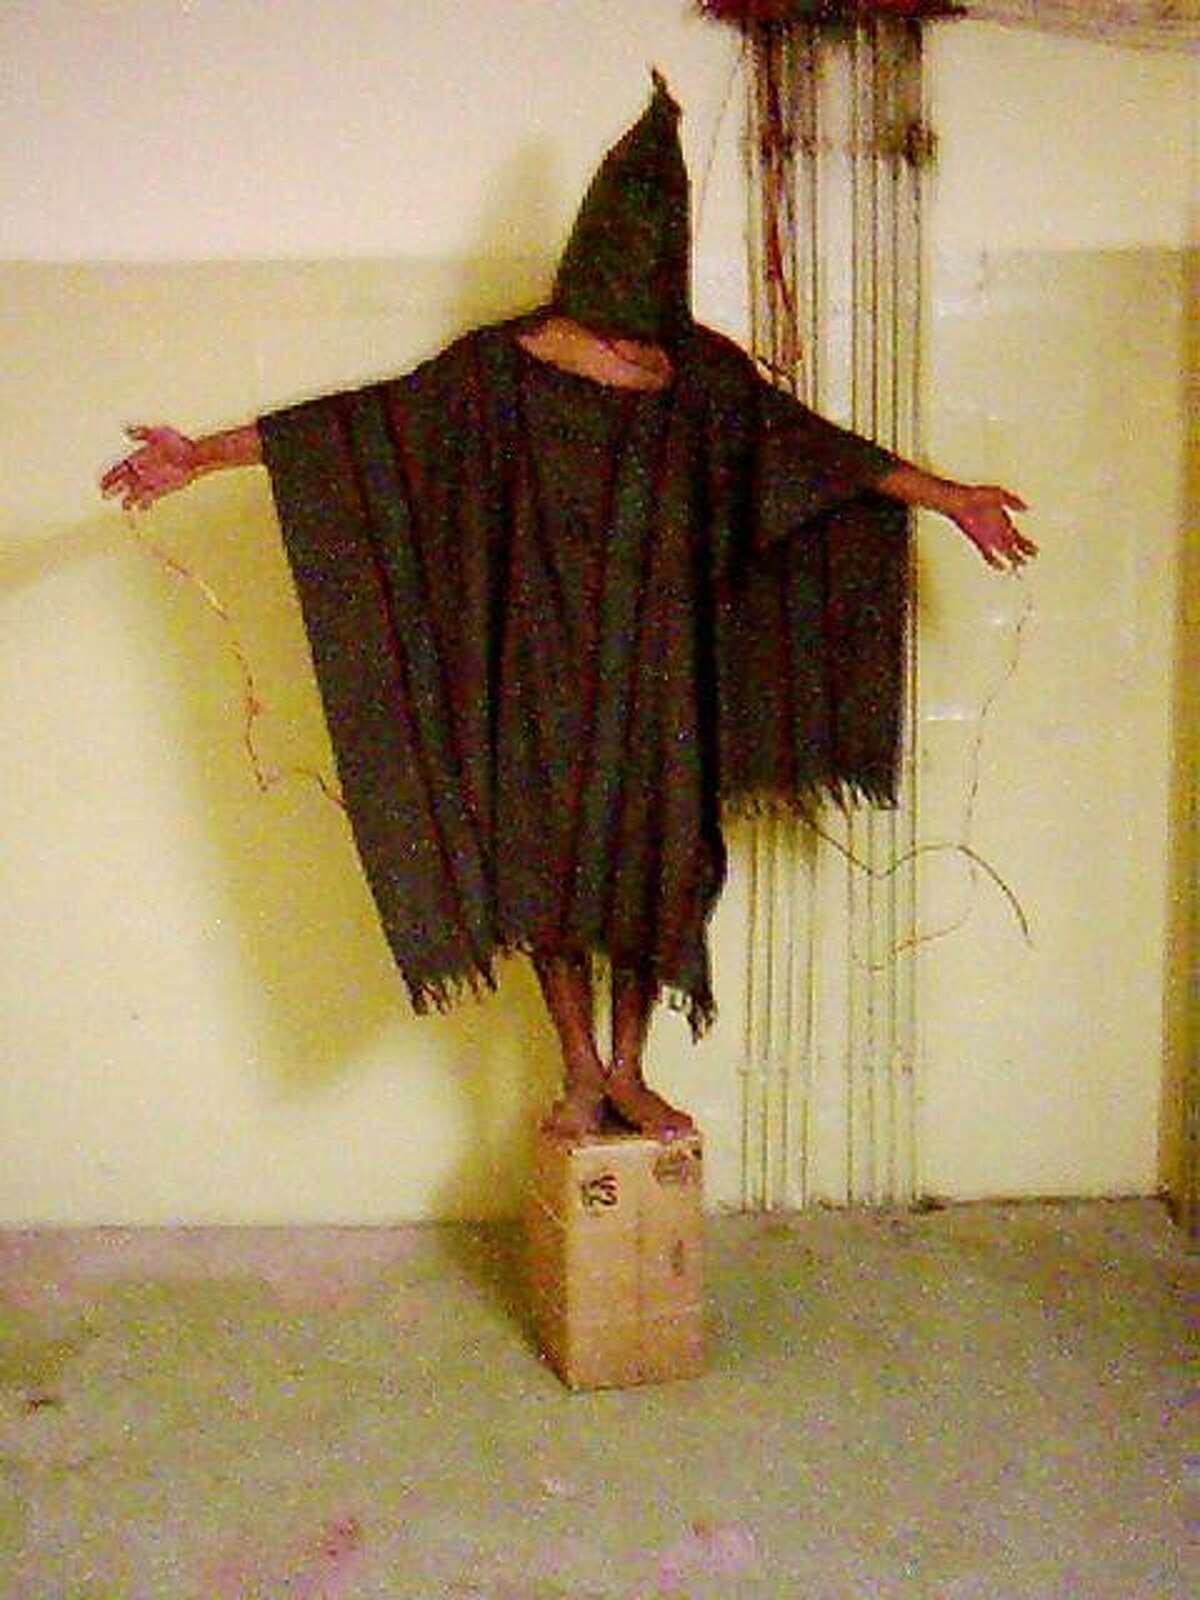 ** HOLD FOR RELEASE UNTIL 12:01 a.m. EDT, WEDNESDAY, JUNE 18, 2008 ** ** FILE ** This is a file image obtained by The Associated Press which shows an unidentified detainee standing on a box with a bag on his head and wires attached to him in late 2003 at the Abu Ghraib prison in Baghdad, Iraq. Years after being released by the U.S. military, former detainees held in Abu Ghraib and Guantanamo Bay Naval Base are suffering debilitating injuries and mental disorders from their interrogation and alleged torture, according to a new report by a human rights group. (AP Photo)